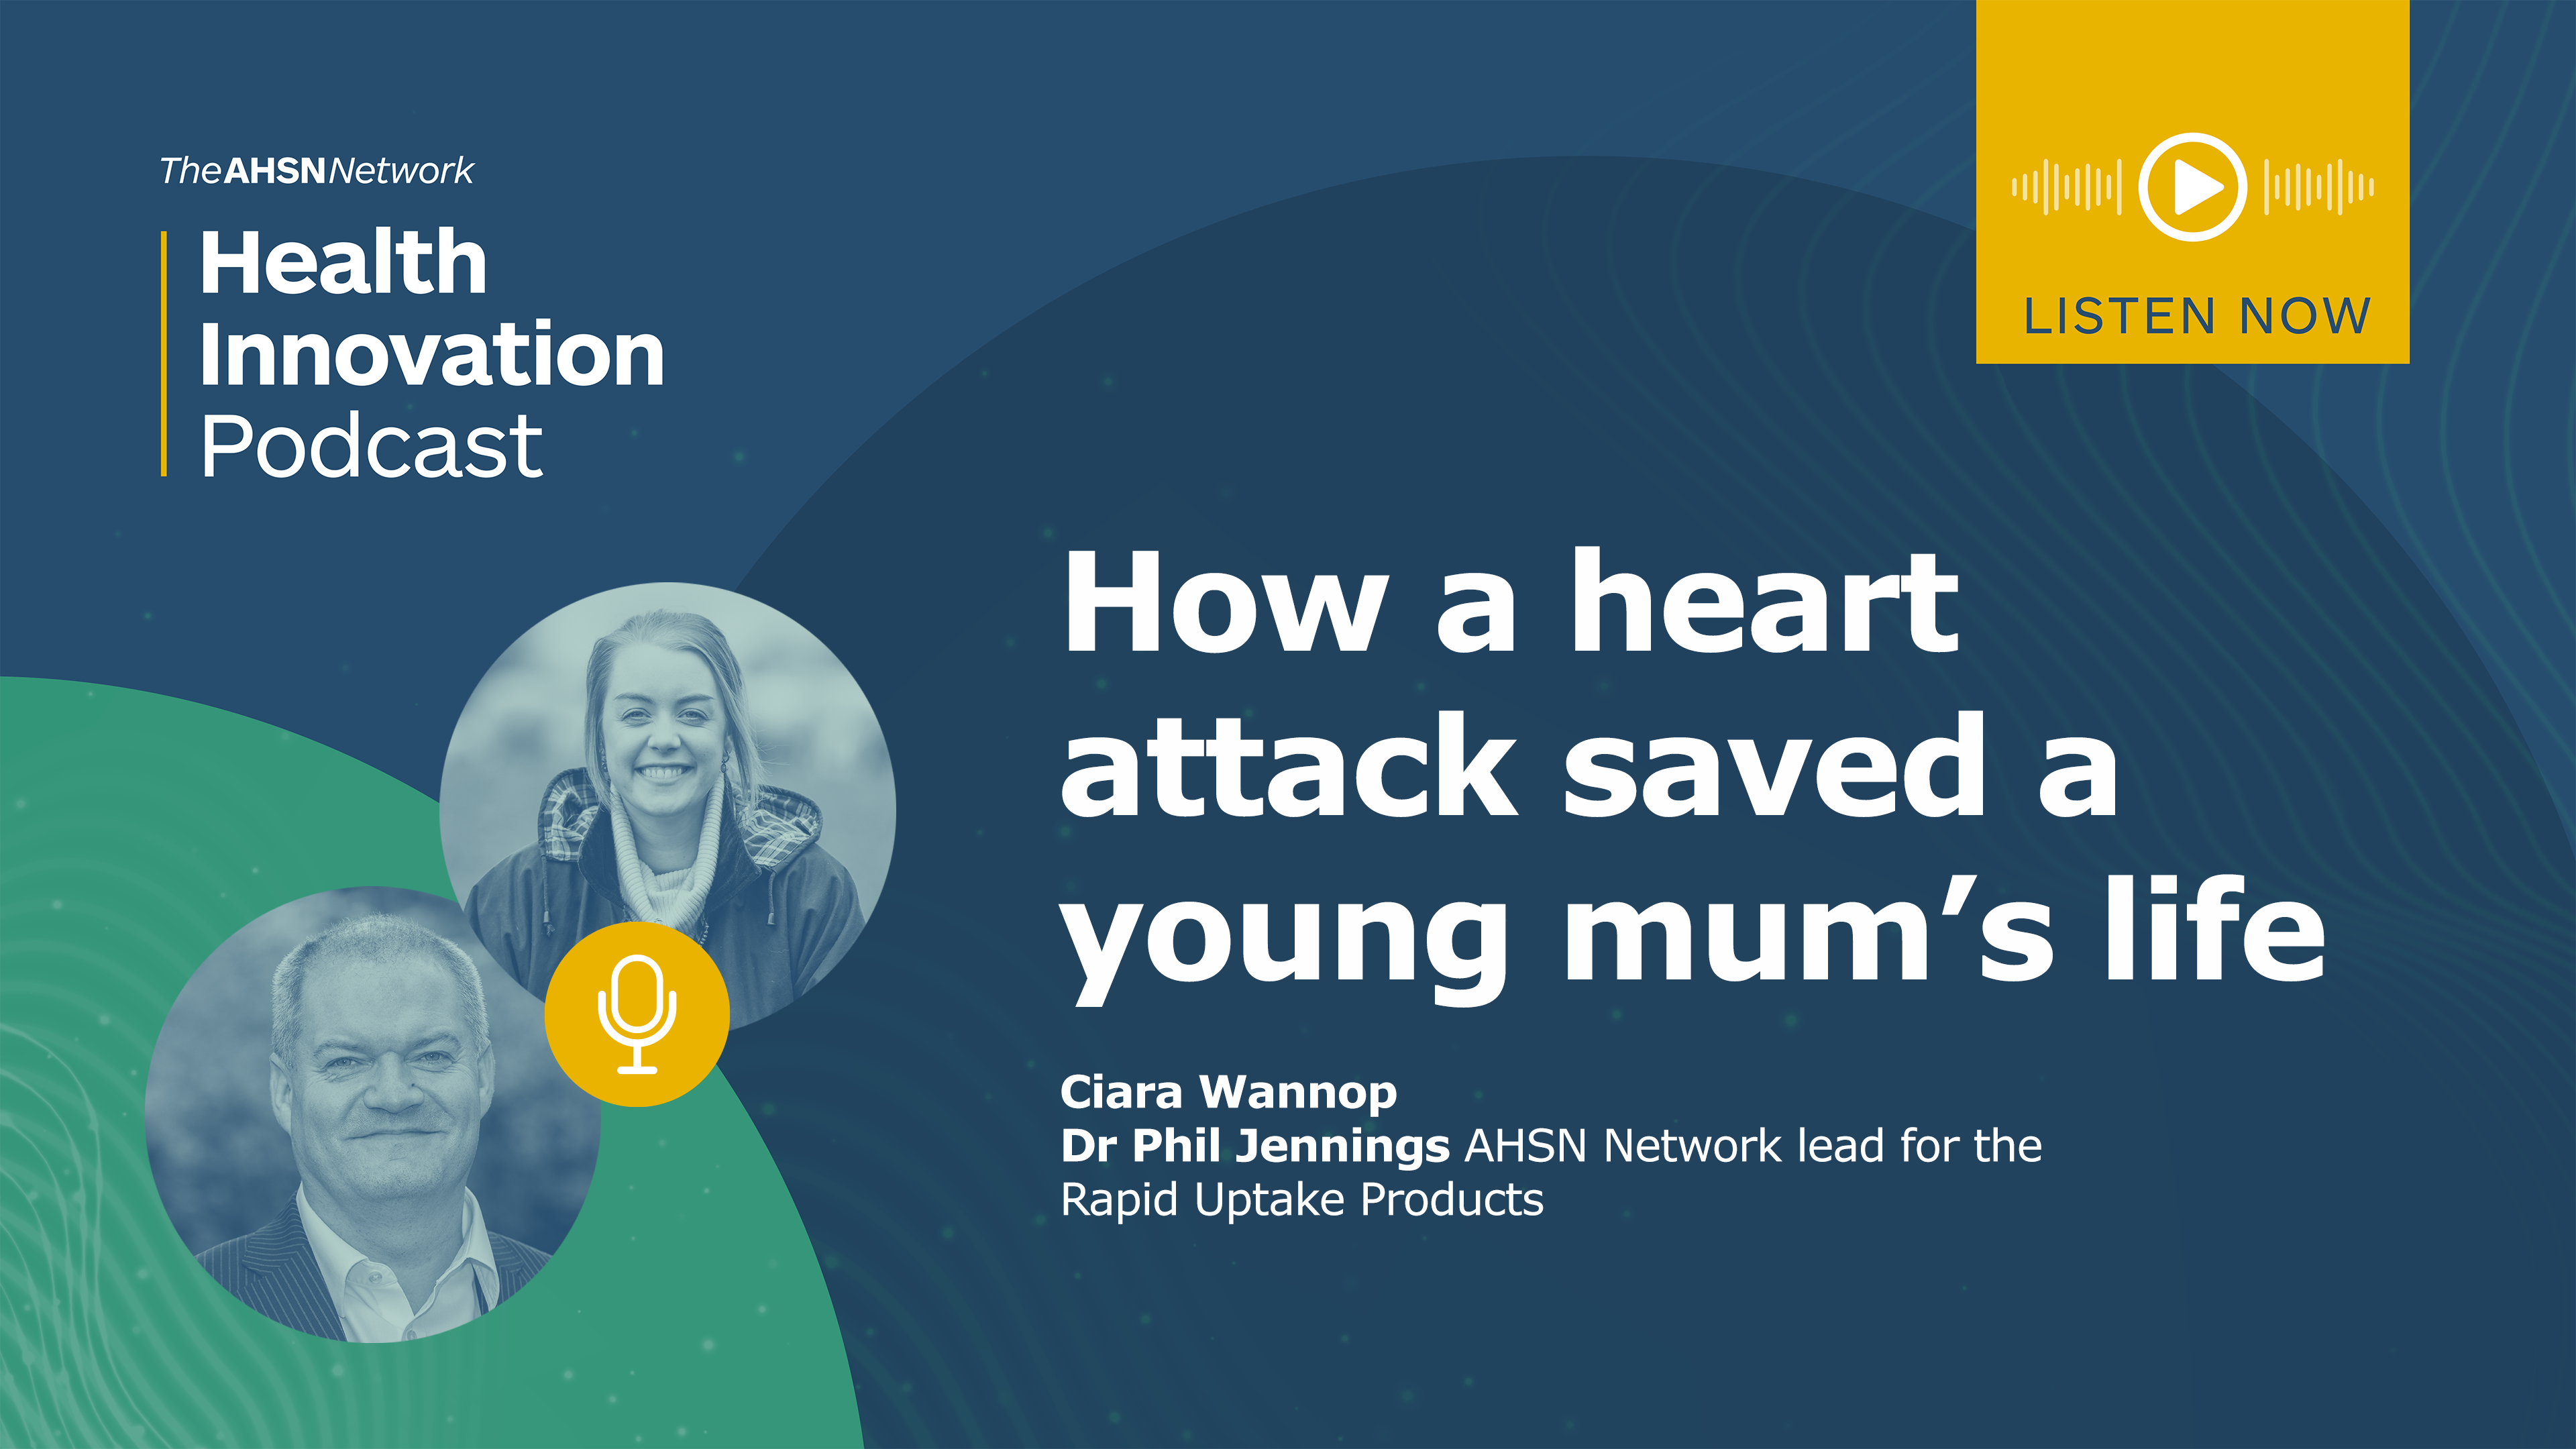 AHSN Network Health Innovation Podcast: How a heart attack saved a young mum's life